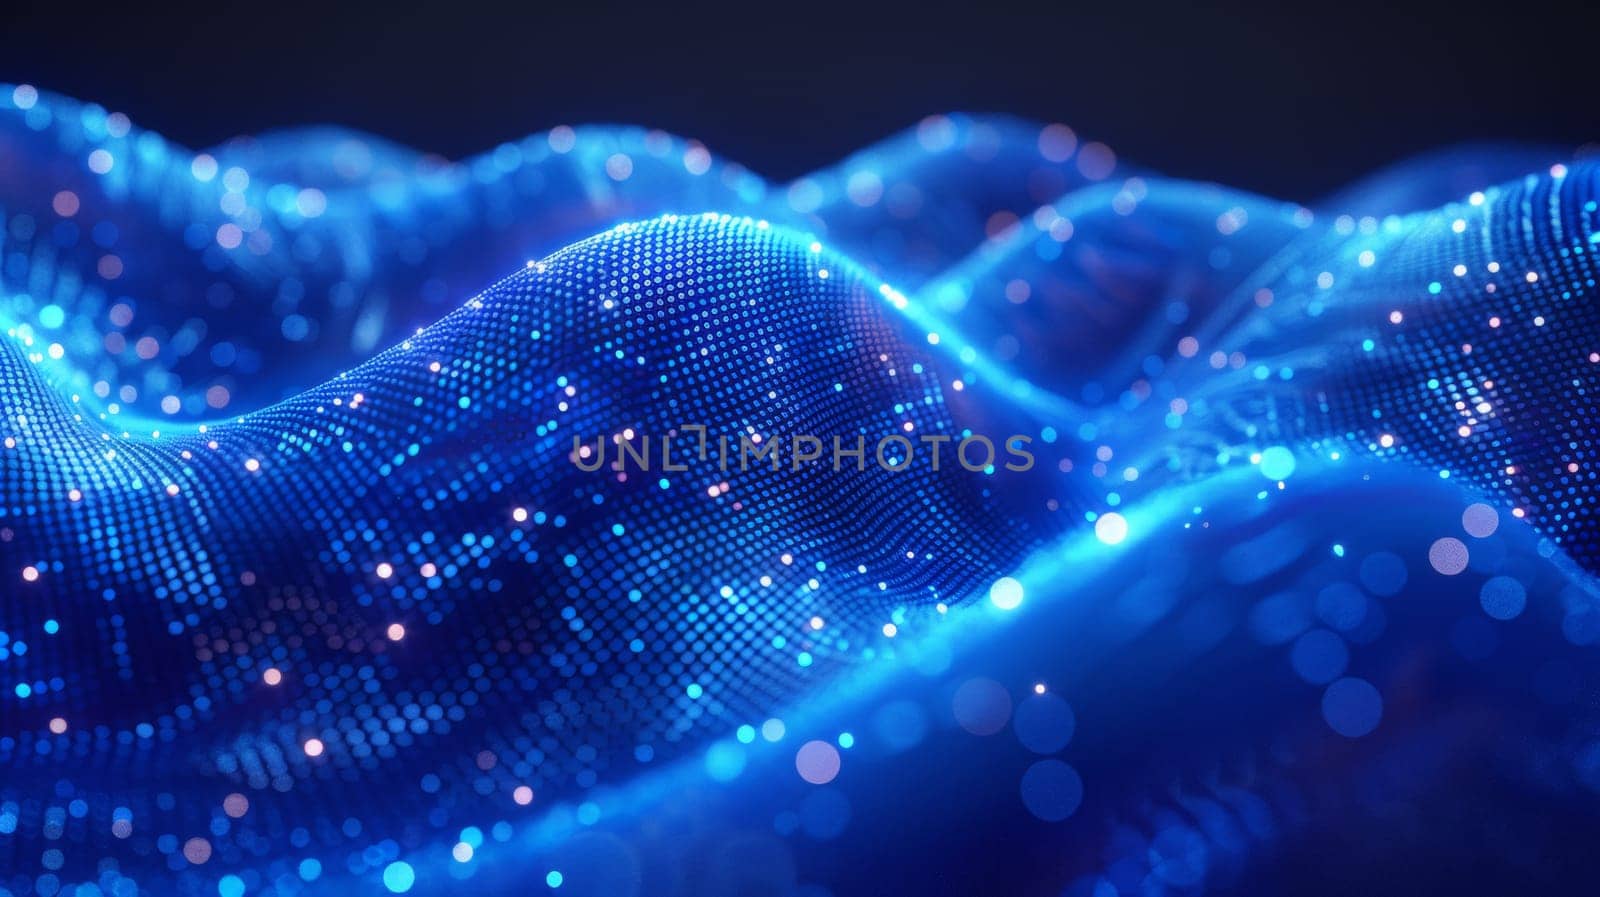 A blue and white abstract image of a wave, AI by starush